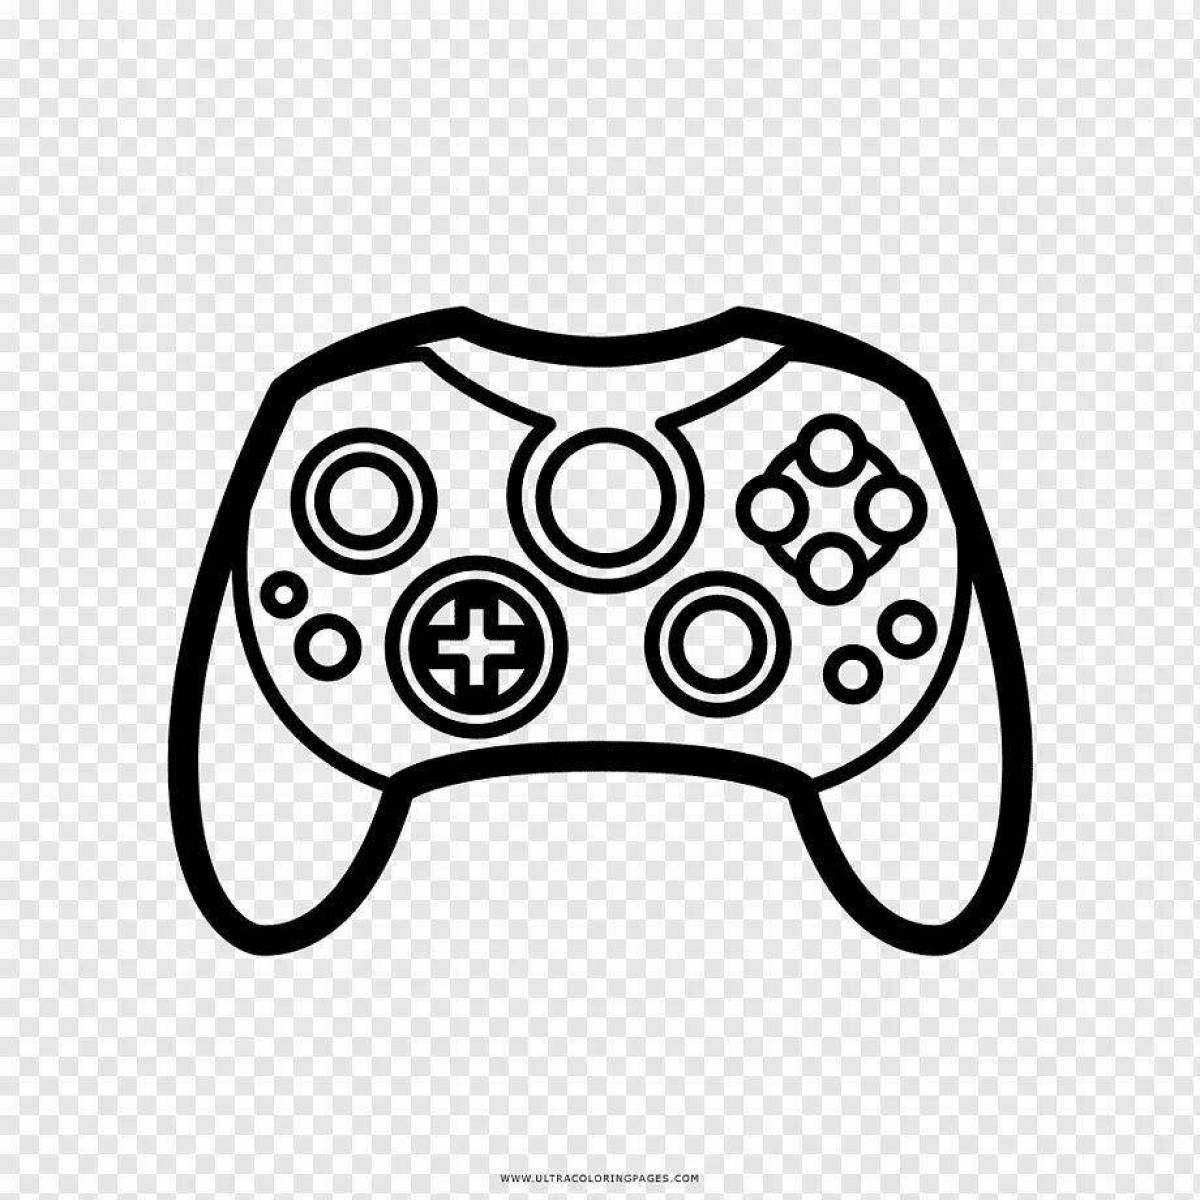 Color-frenzy gamepad coloring page